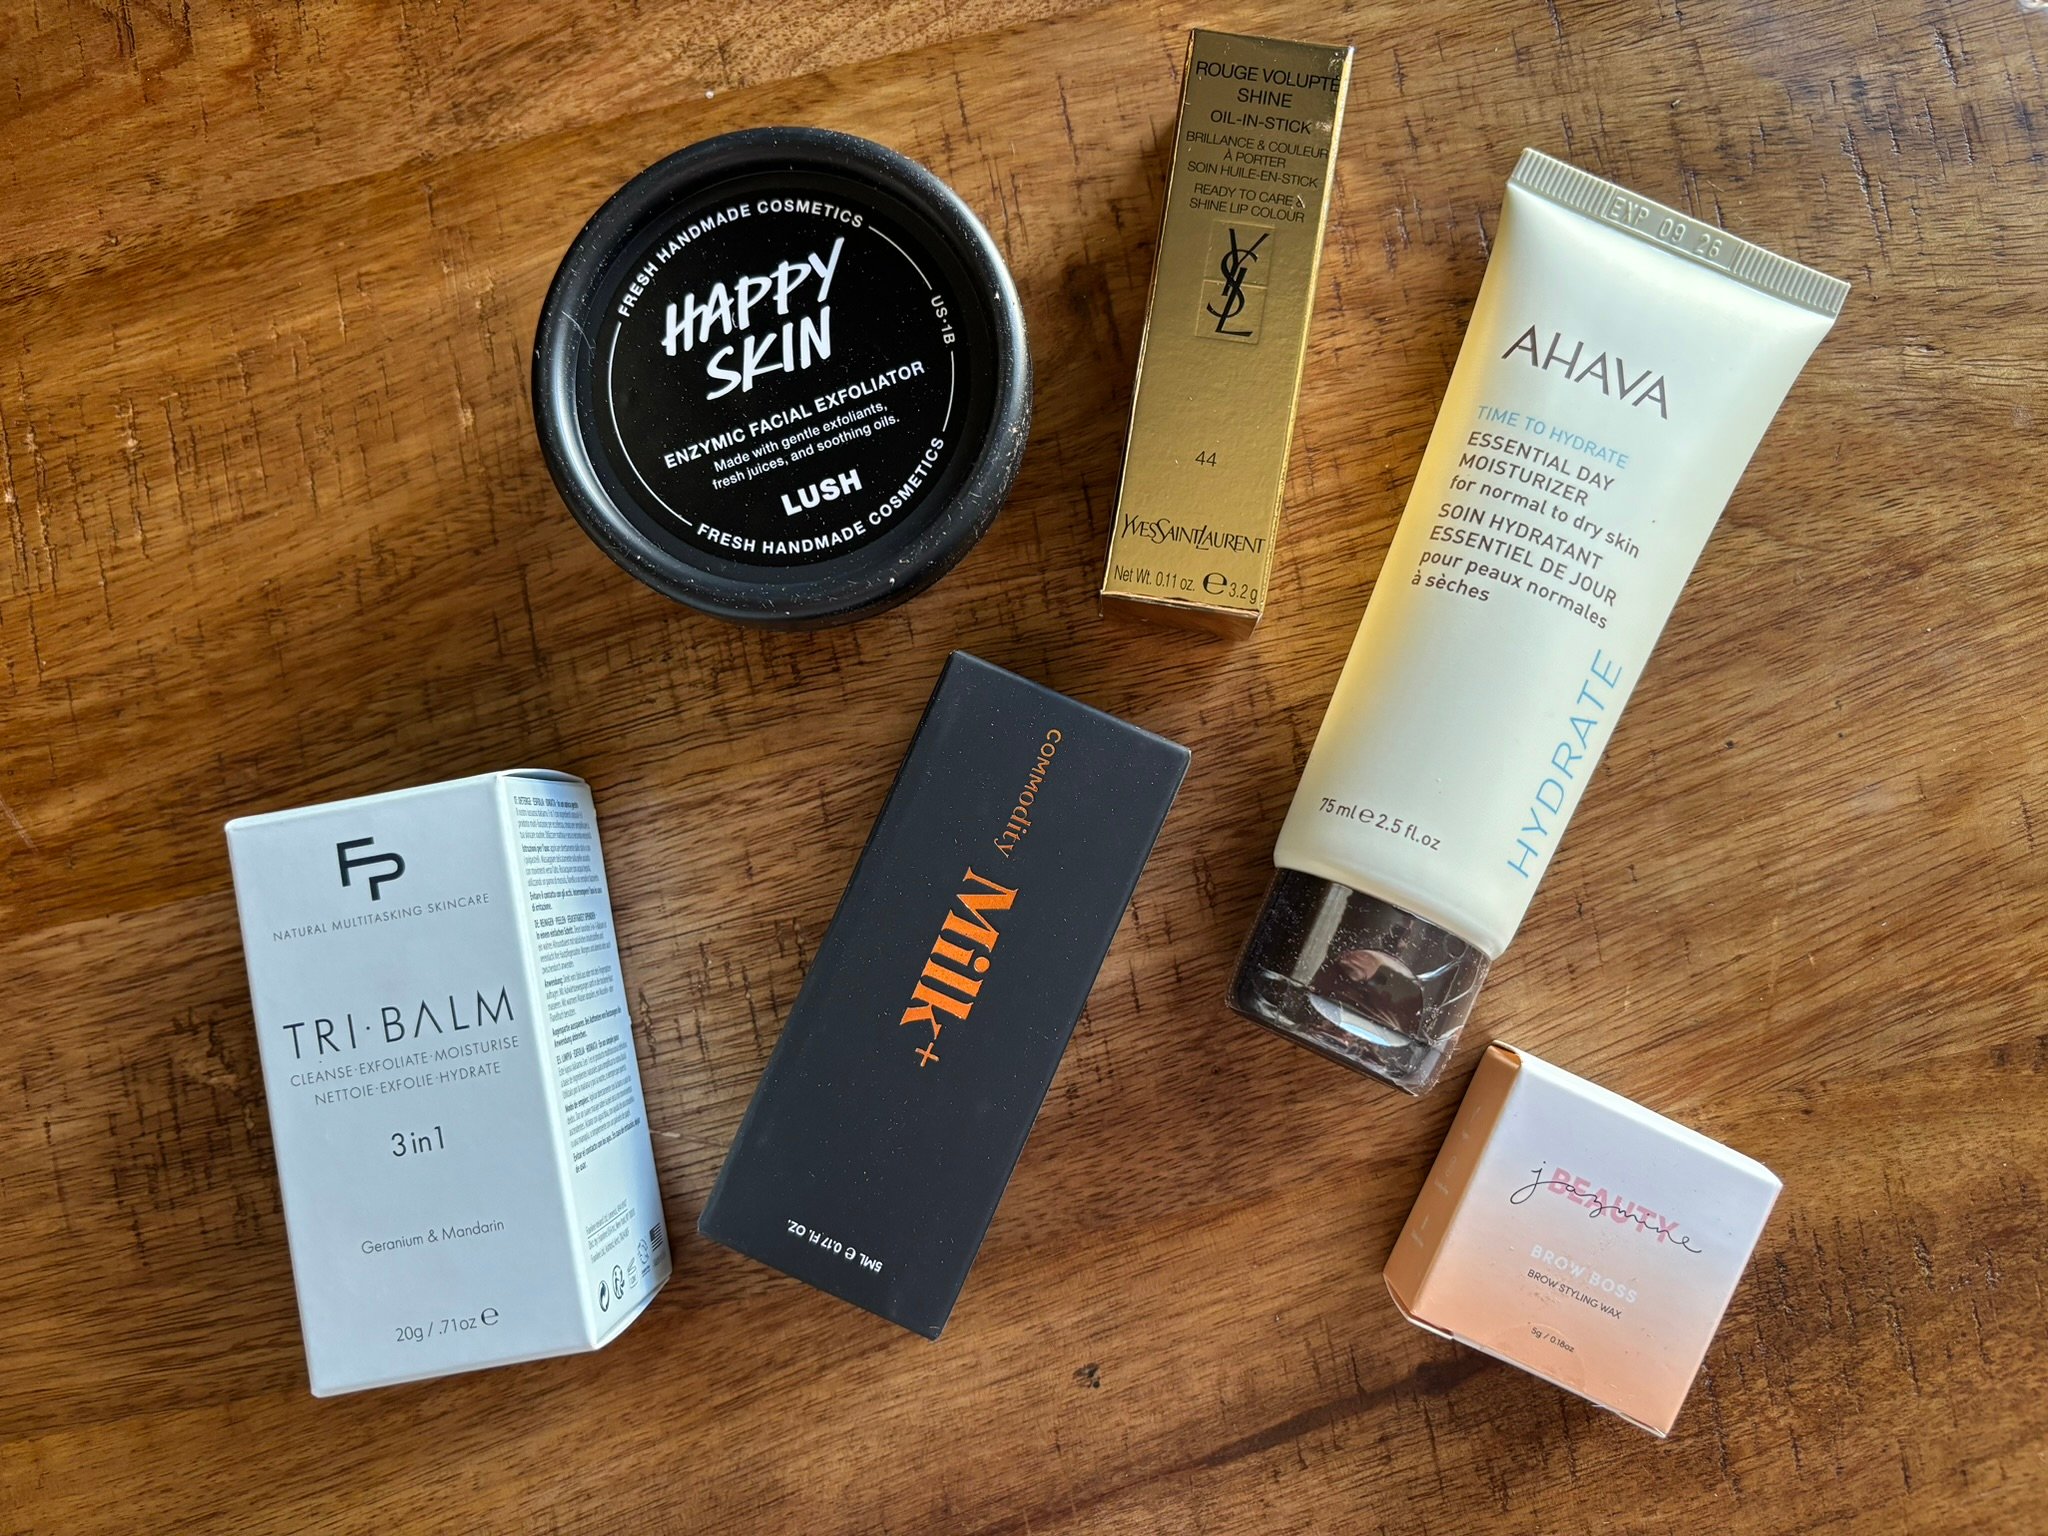 6 beauty and skincare products on a wood surface